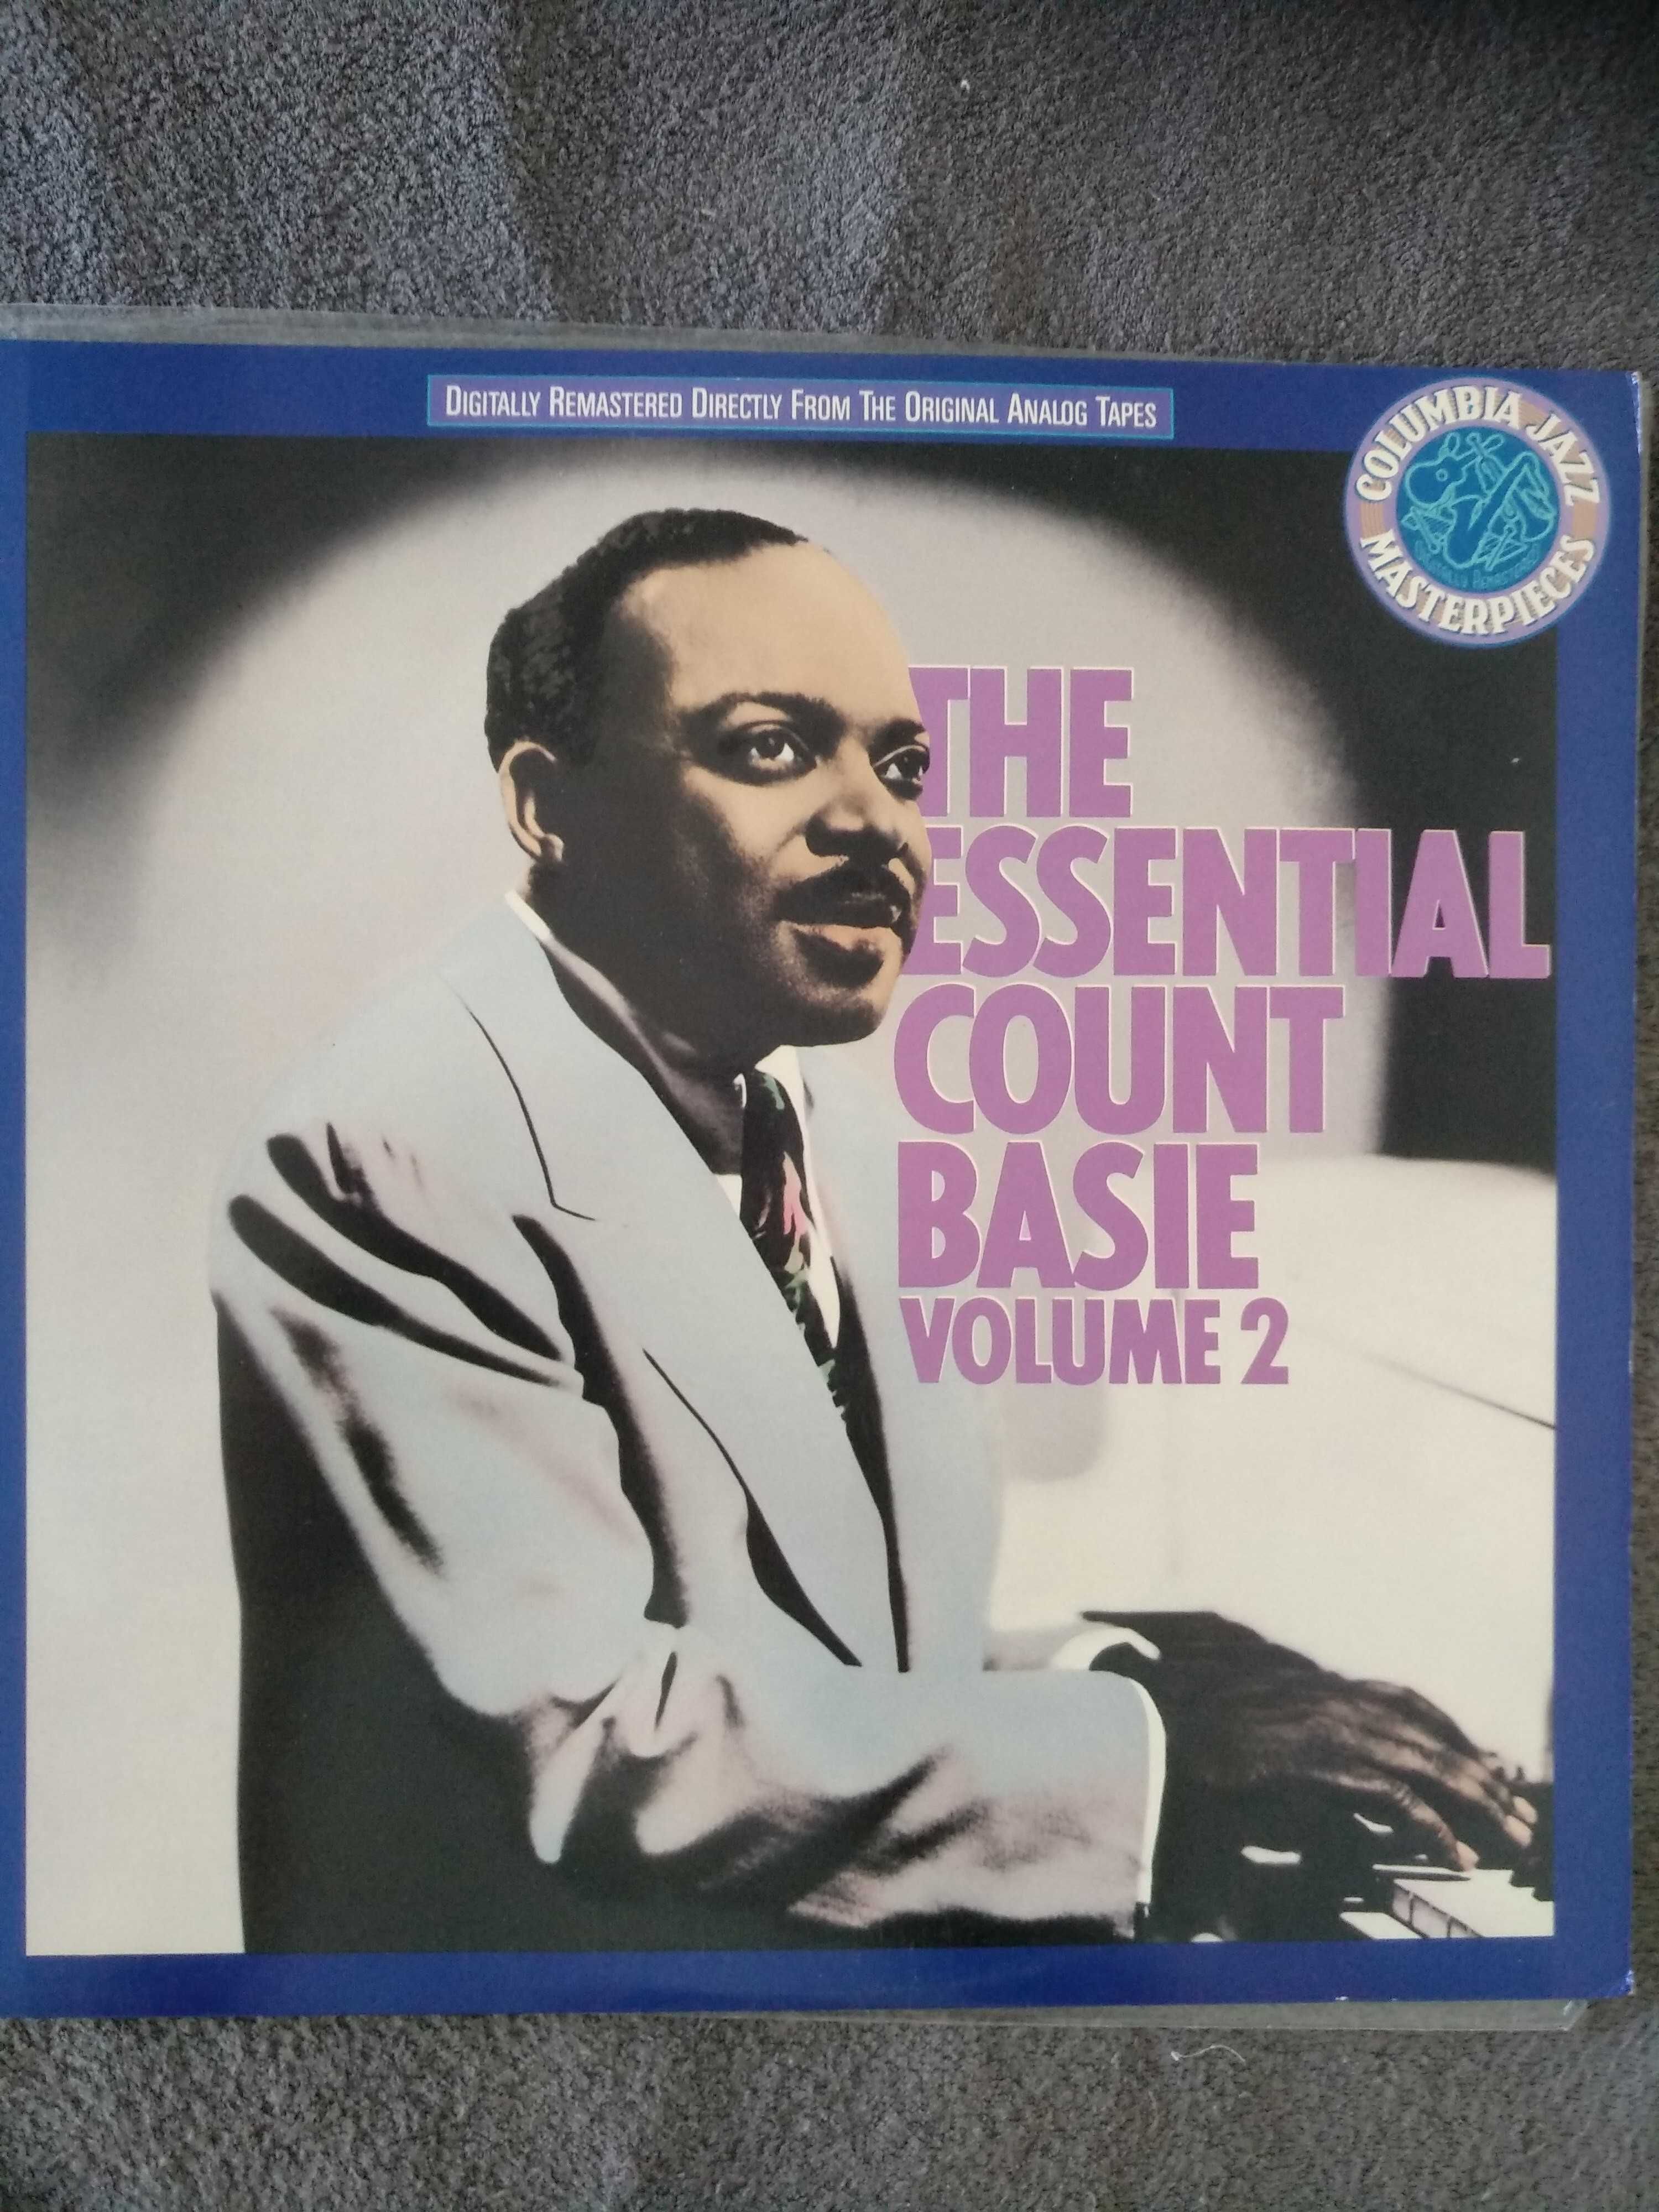 Count Basie ‎– The Essential Count Basie Volume 2